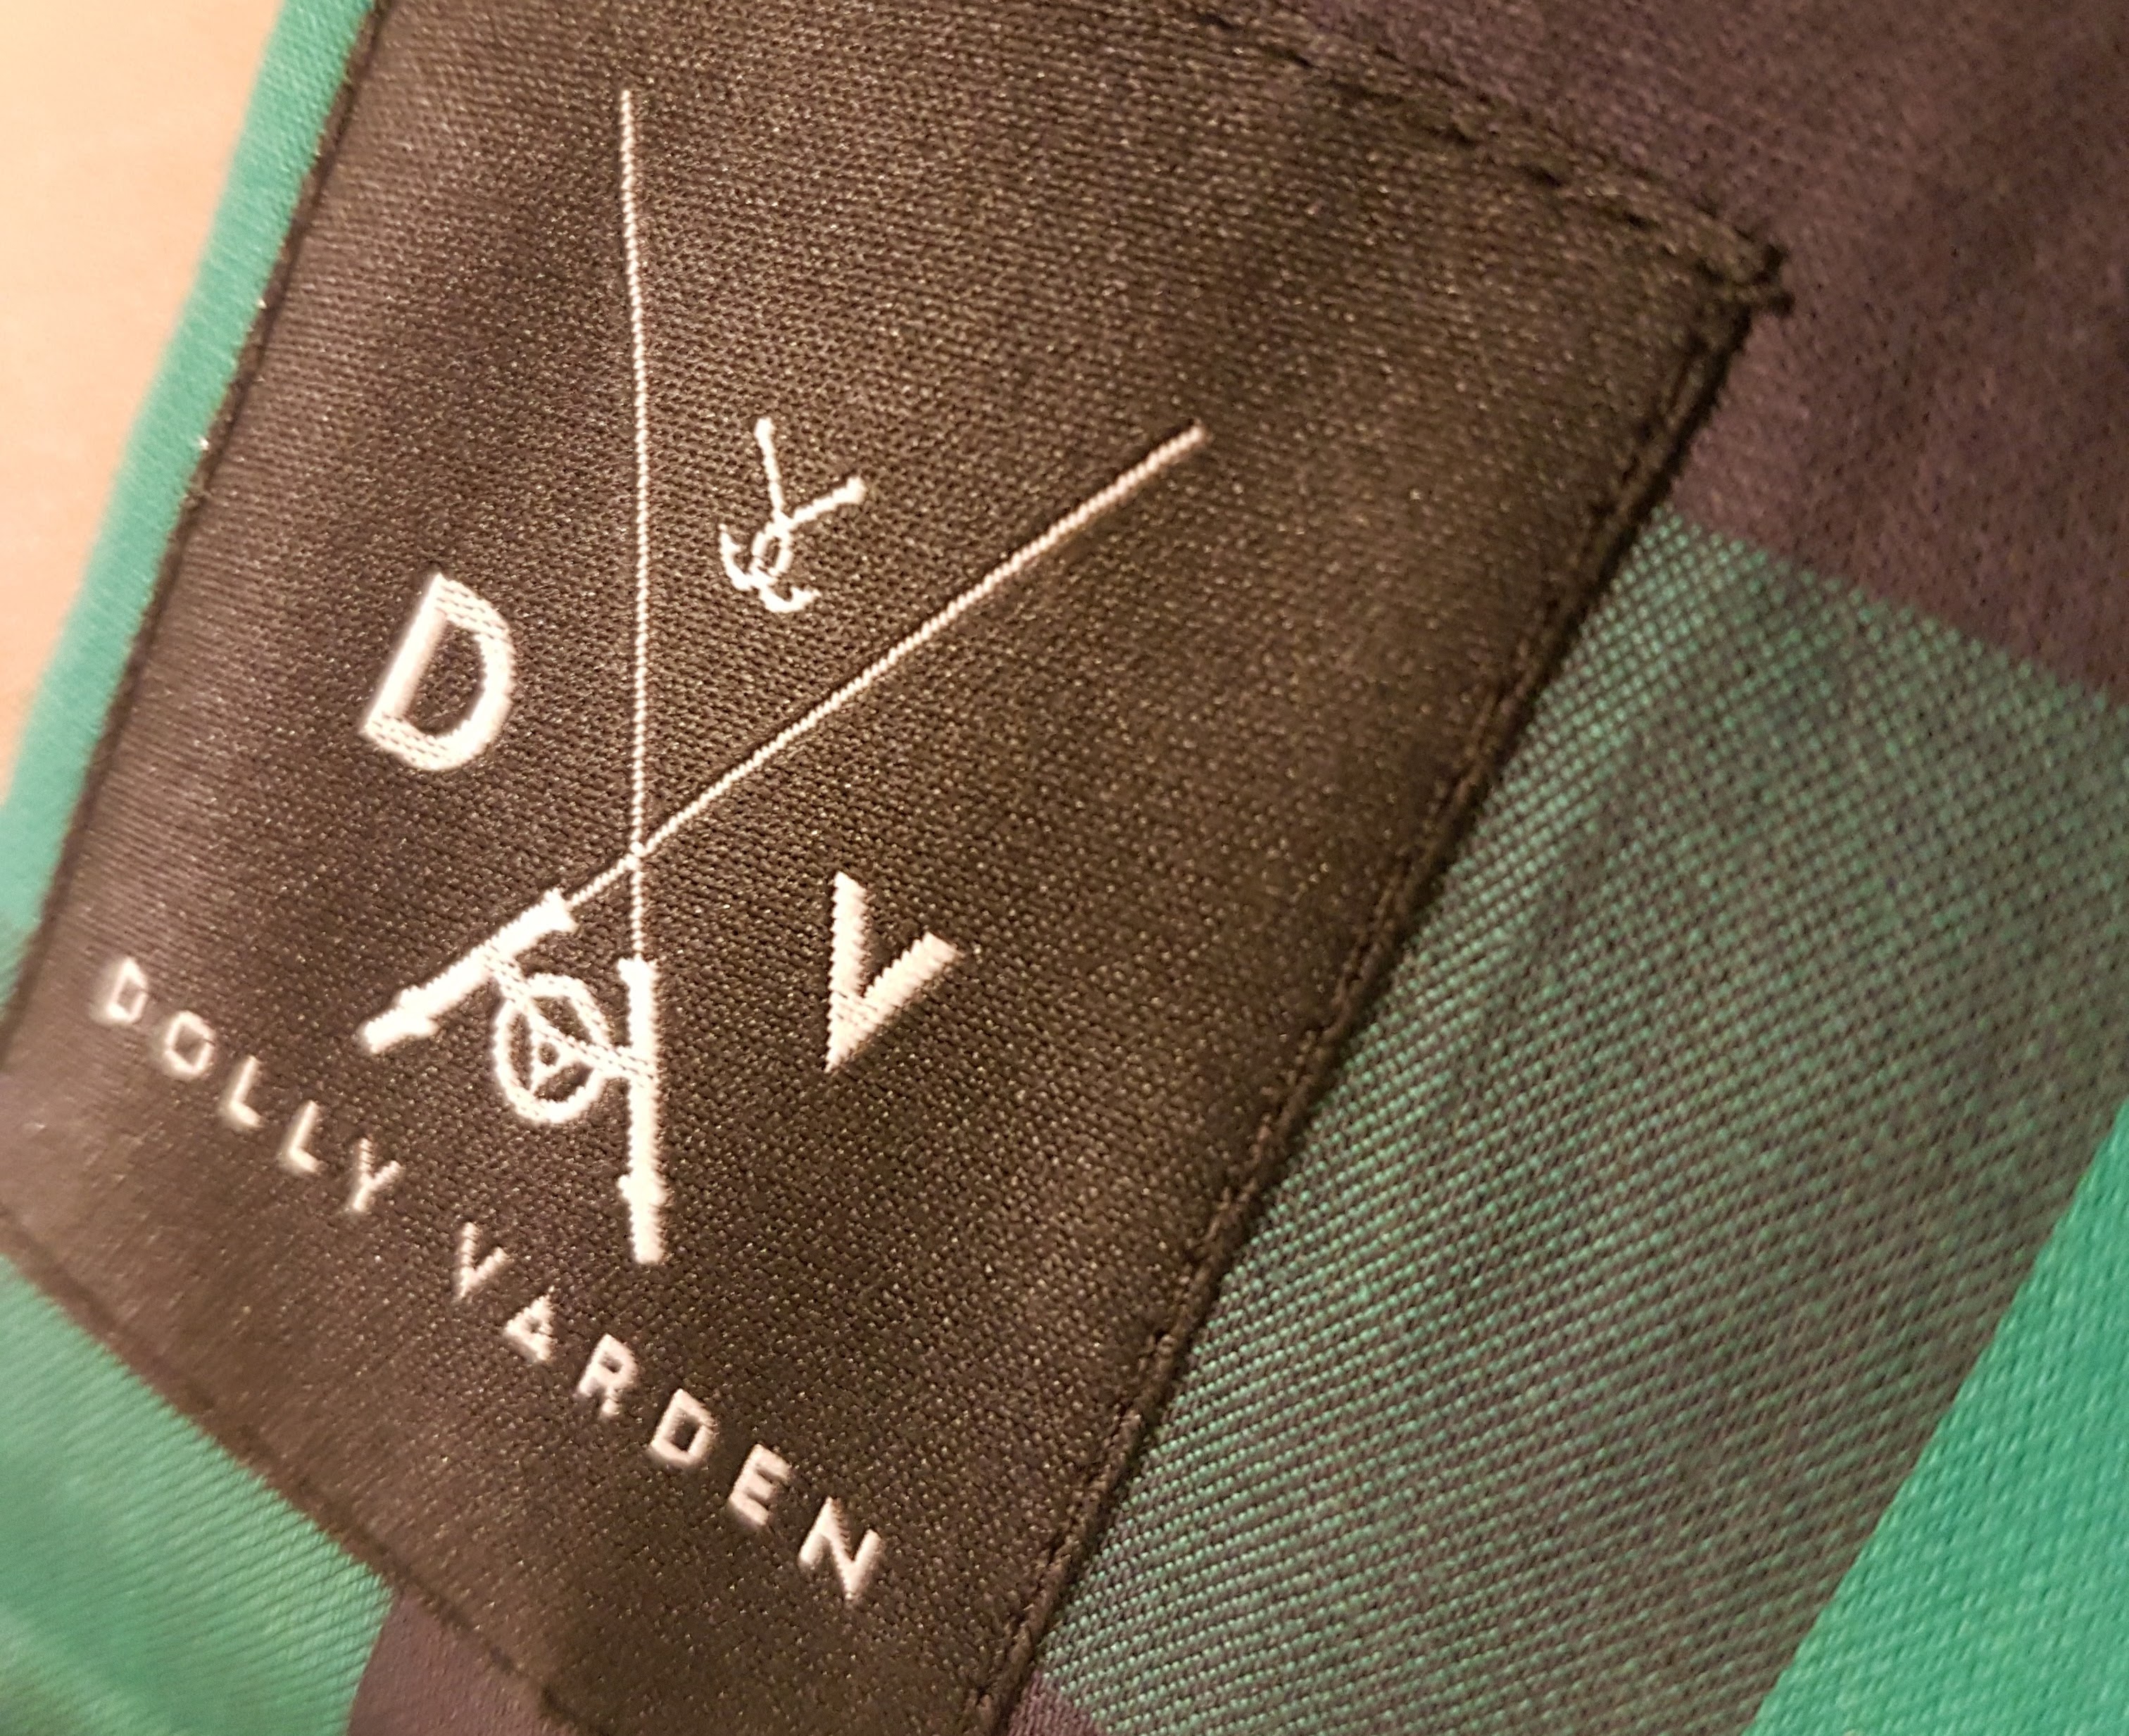 Functional & Multi-Purpose – Dolly Varden Outdoor Clothing [Product Review]